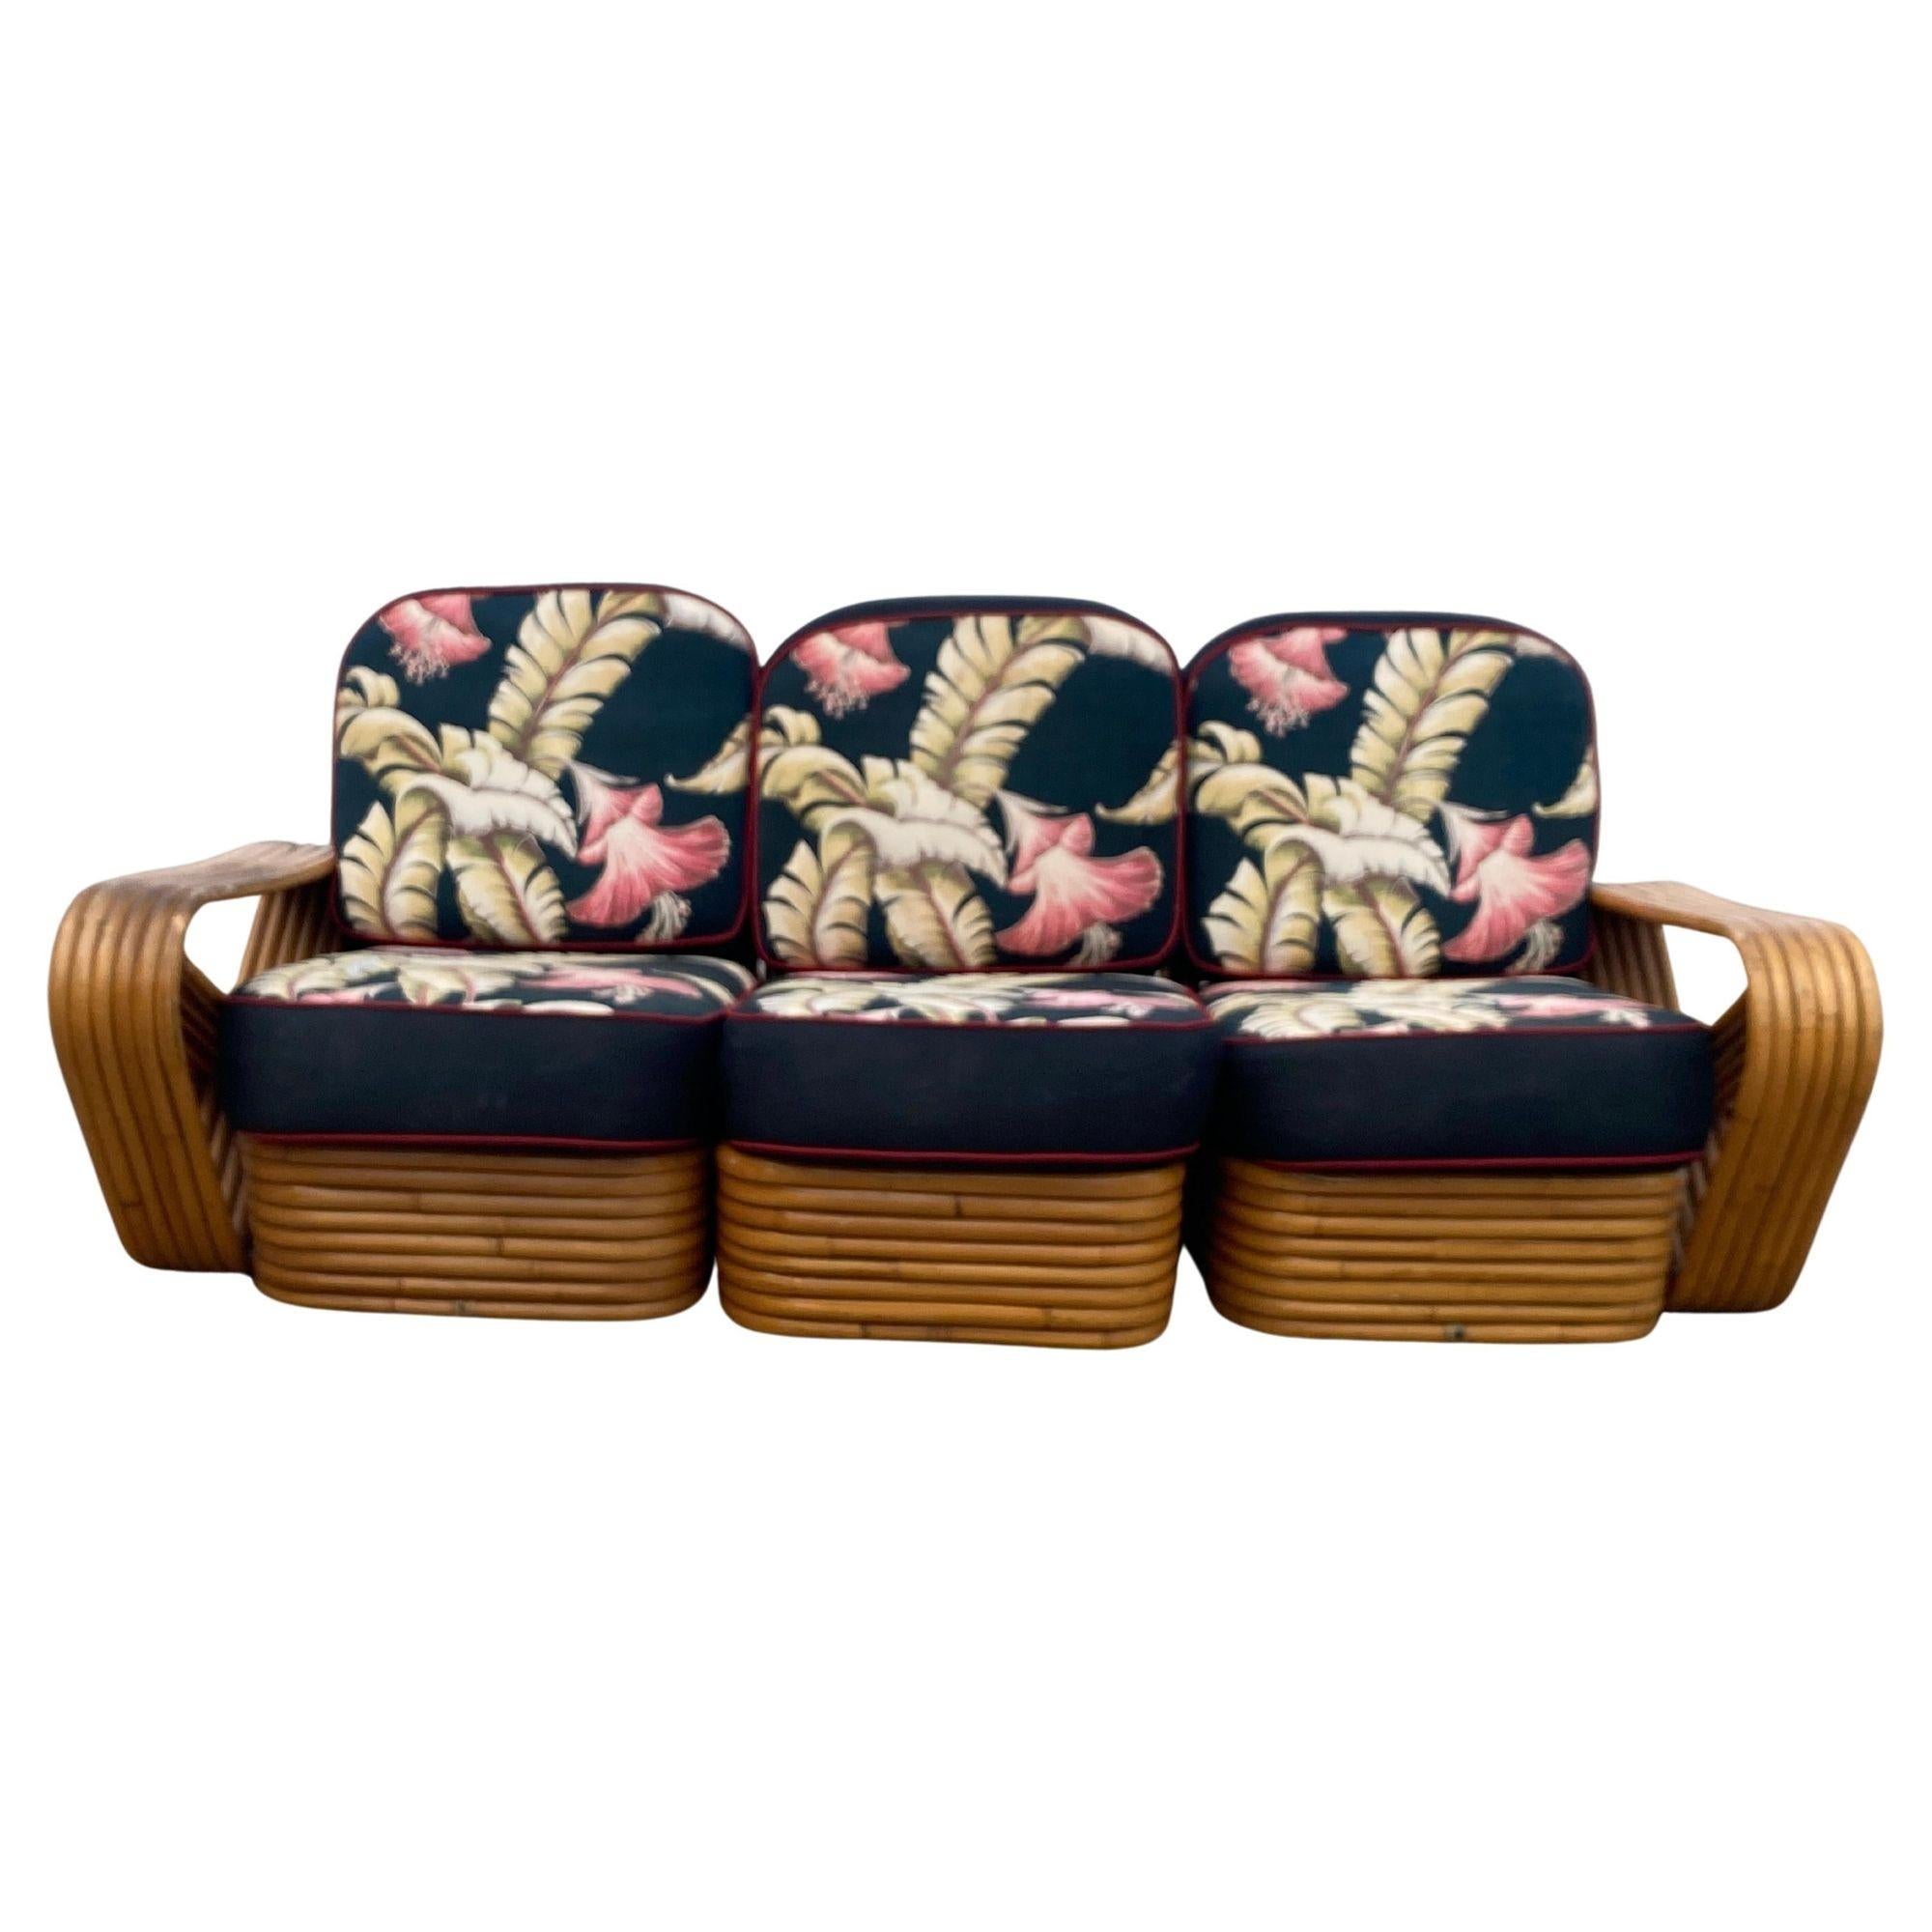 Paul Frankl-style rattan living room set includes a matching three-seat sectional sofa and a pair of lounge chairs. Both feature the famous six-strand square pretzel side arms and stacked rattan base originally designed by Paul Frankl. The seats are